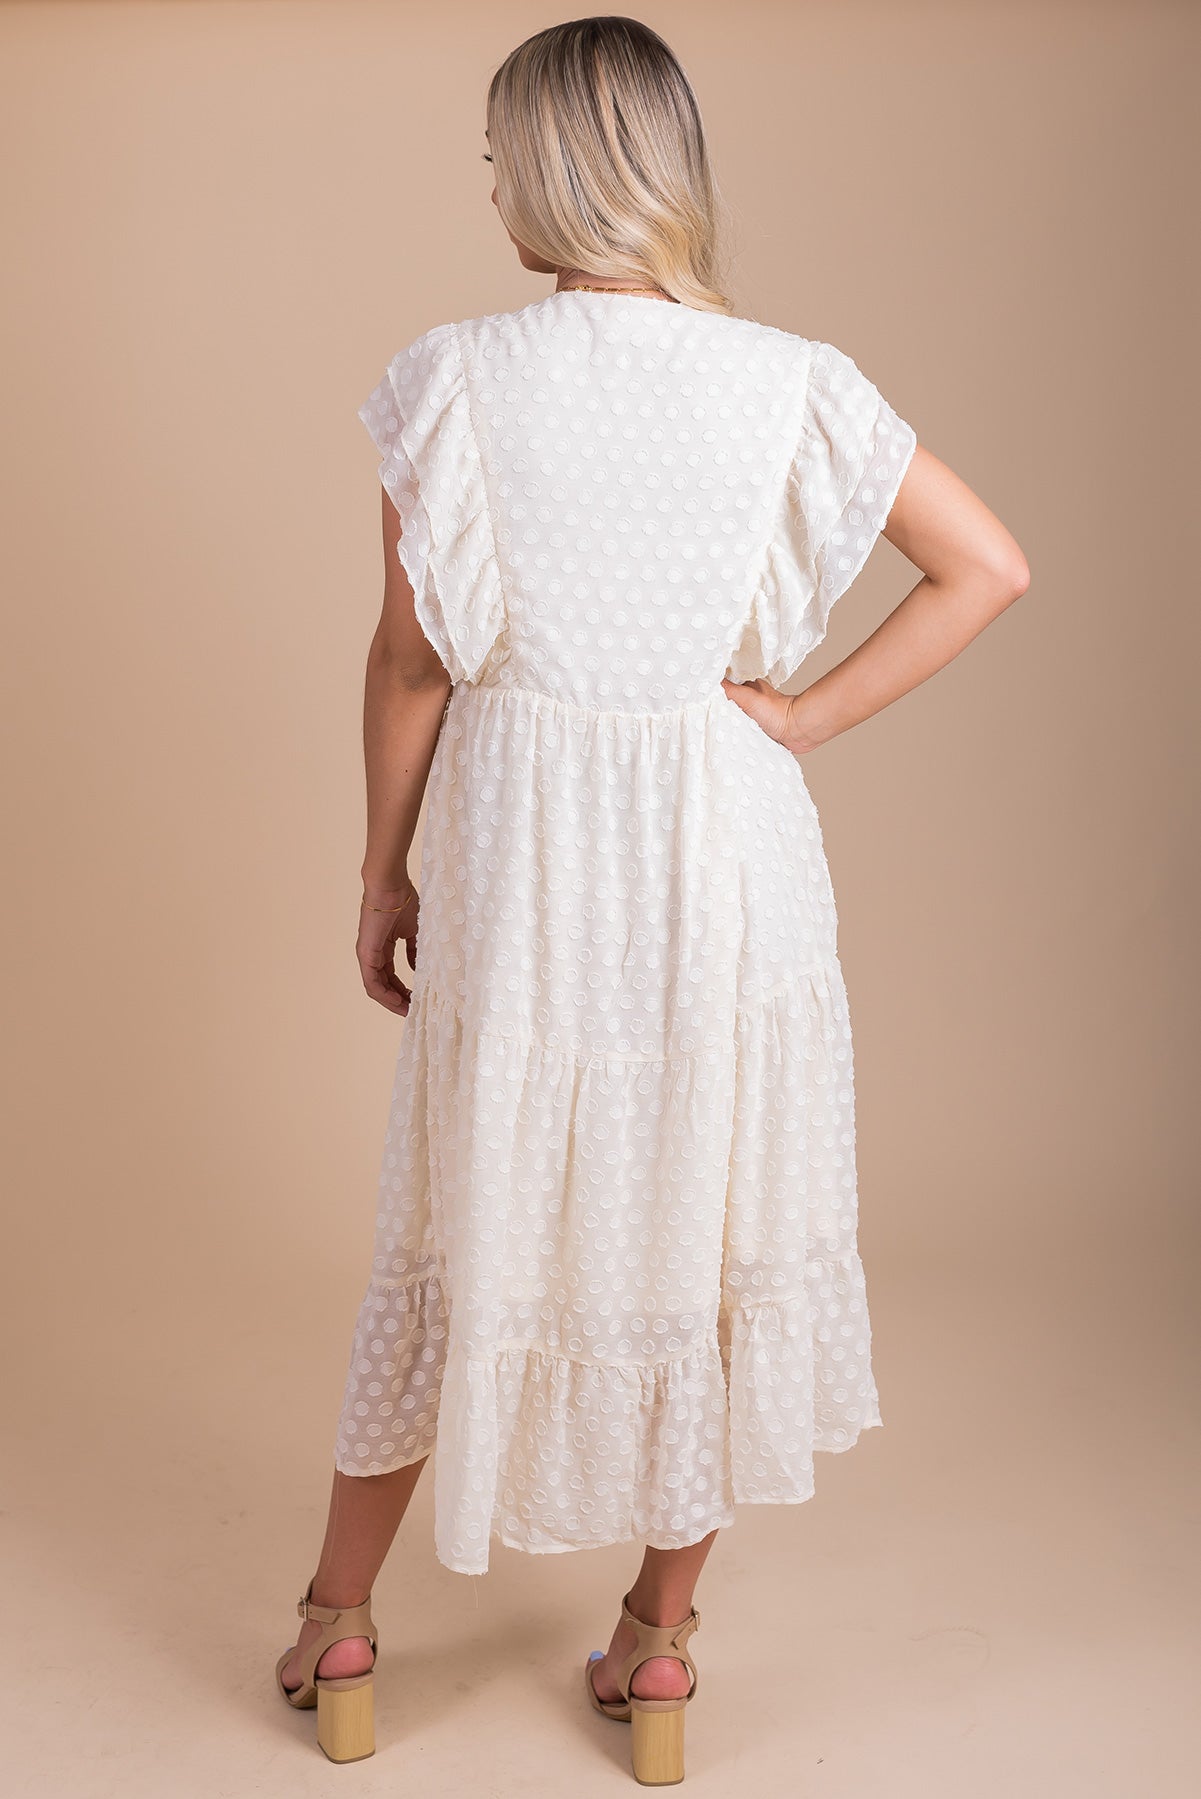 White Polka Dot Textured Midi Dress with Tiered Skirt for Women